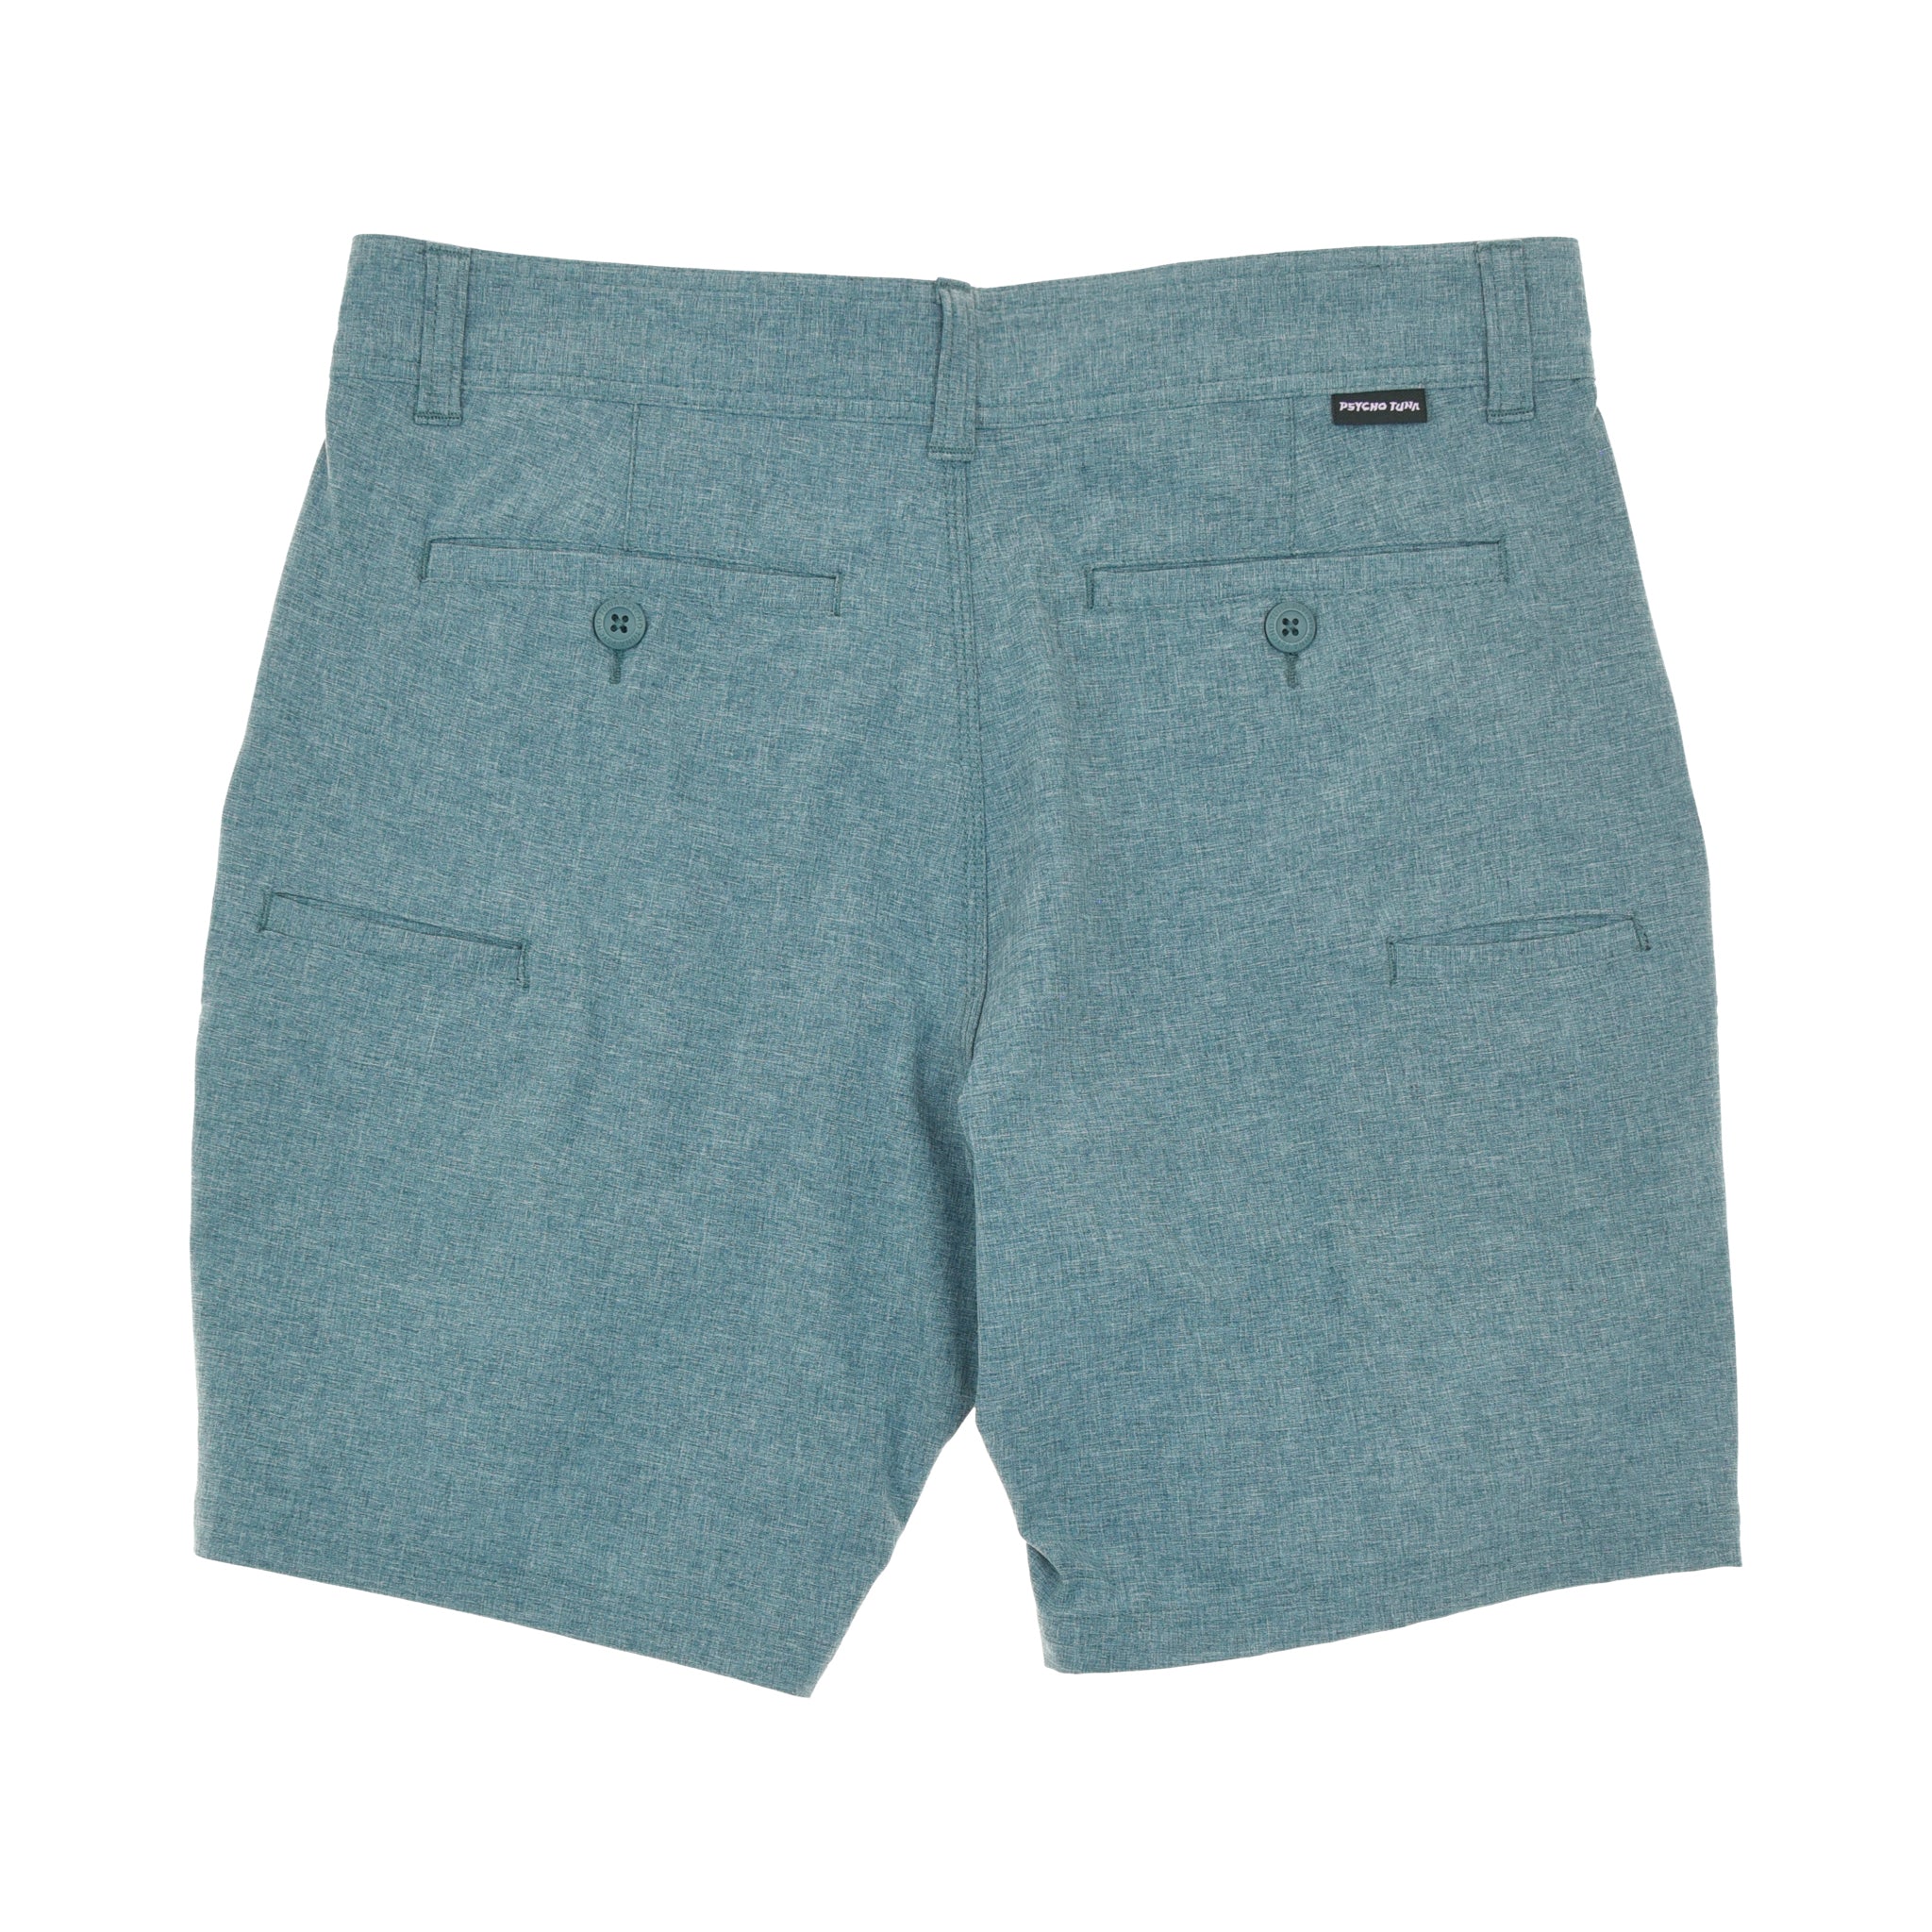 Deckhand Delight: Men's Hybrid Shorts for Sea Soldiers –